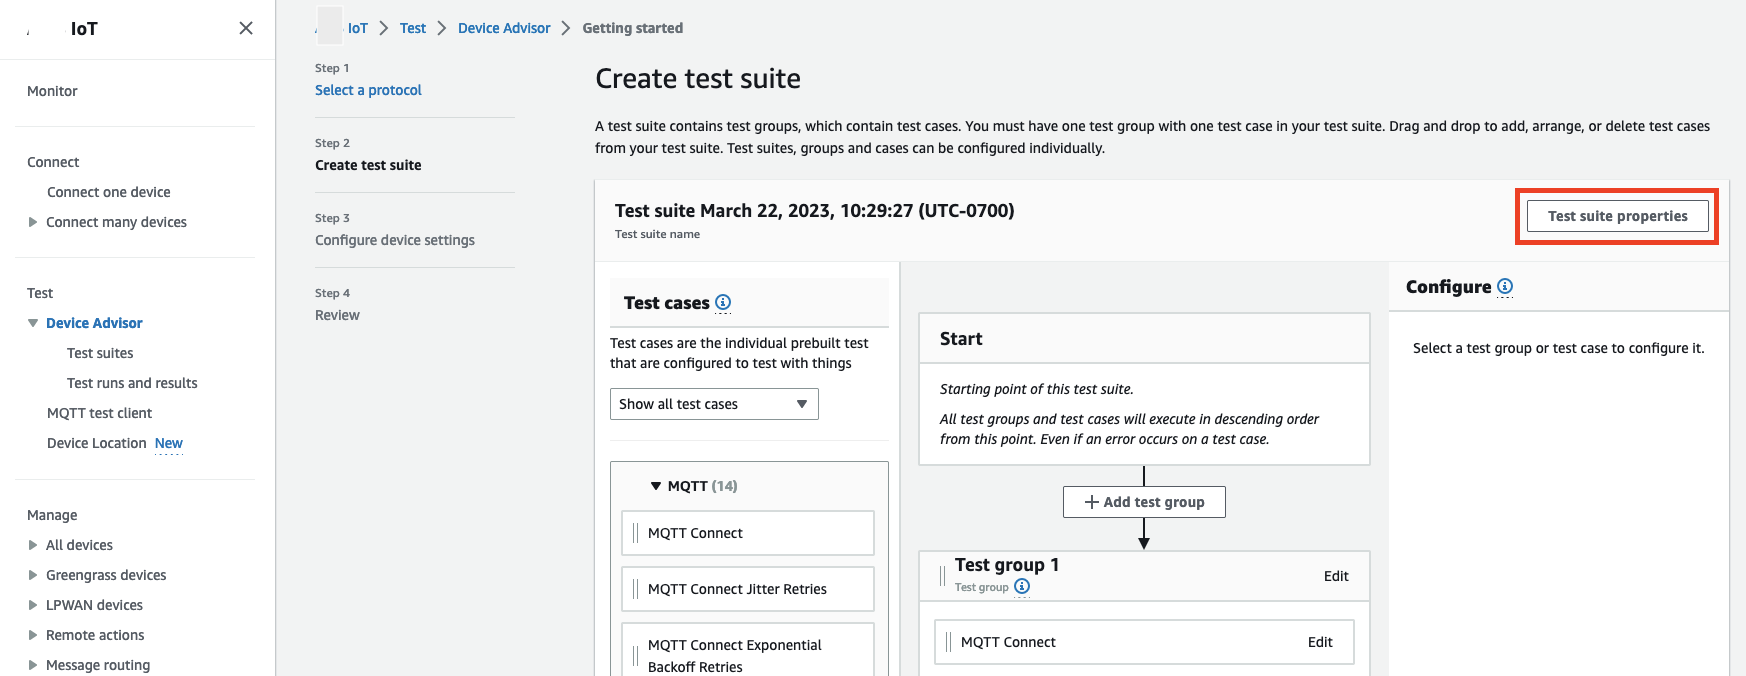 
                        
                            The "Create test suite" screen in Device Advisors, 
                            where users can create and configure test groups and cases for testing IoT devices with MQTT protocol.
                        
                    